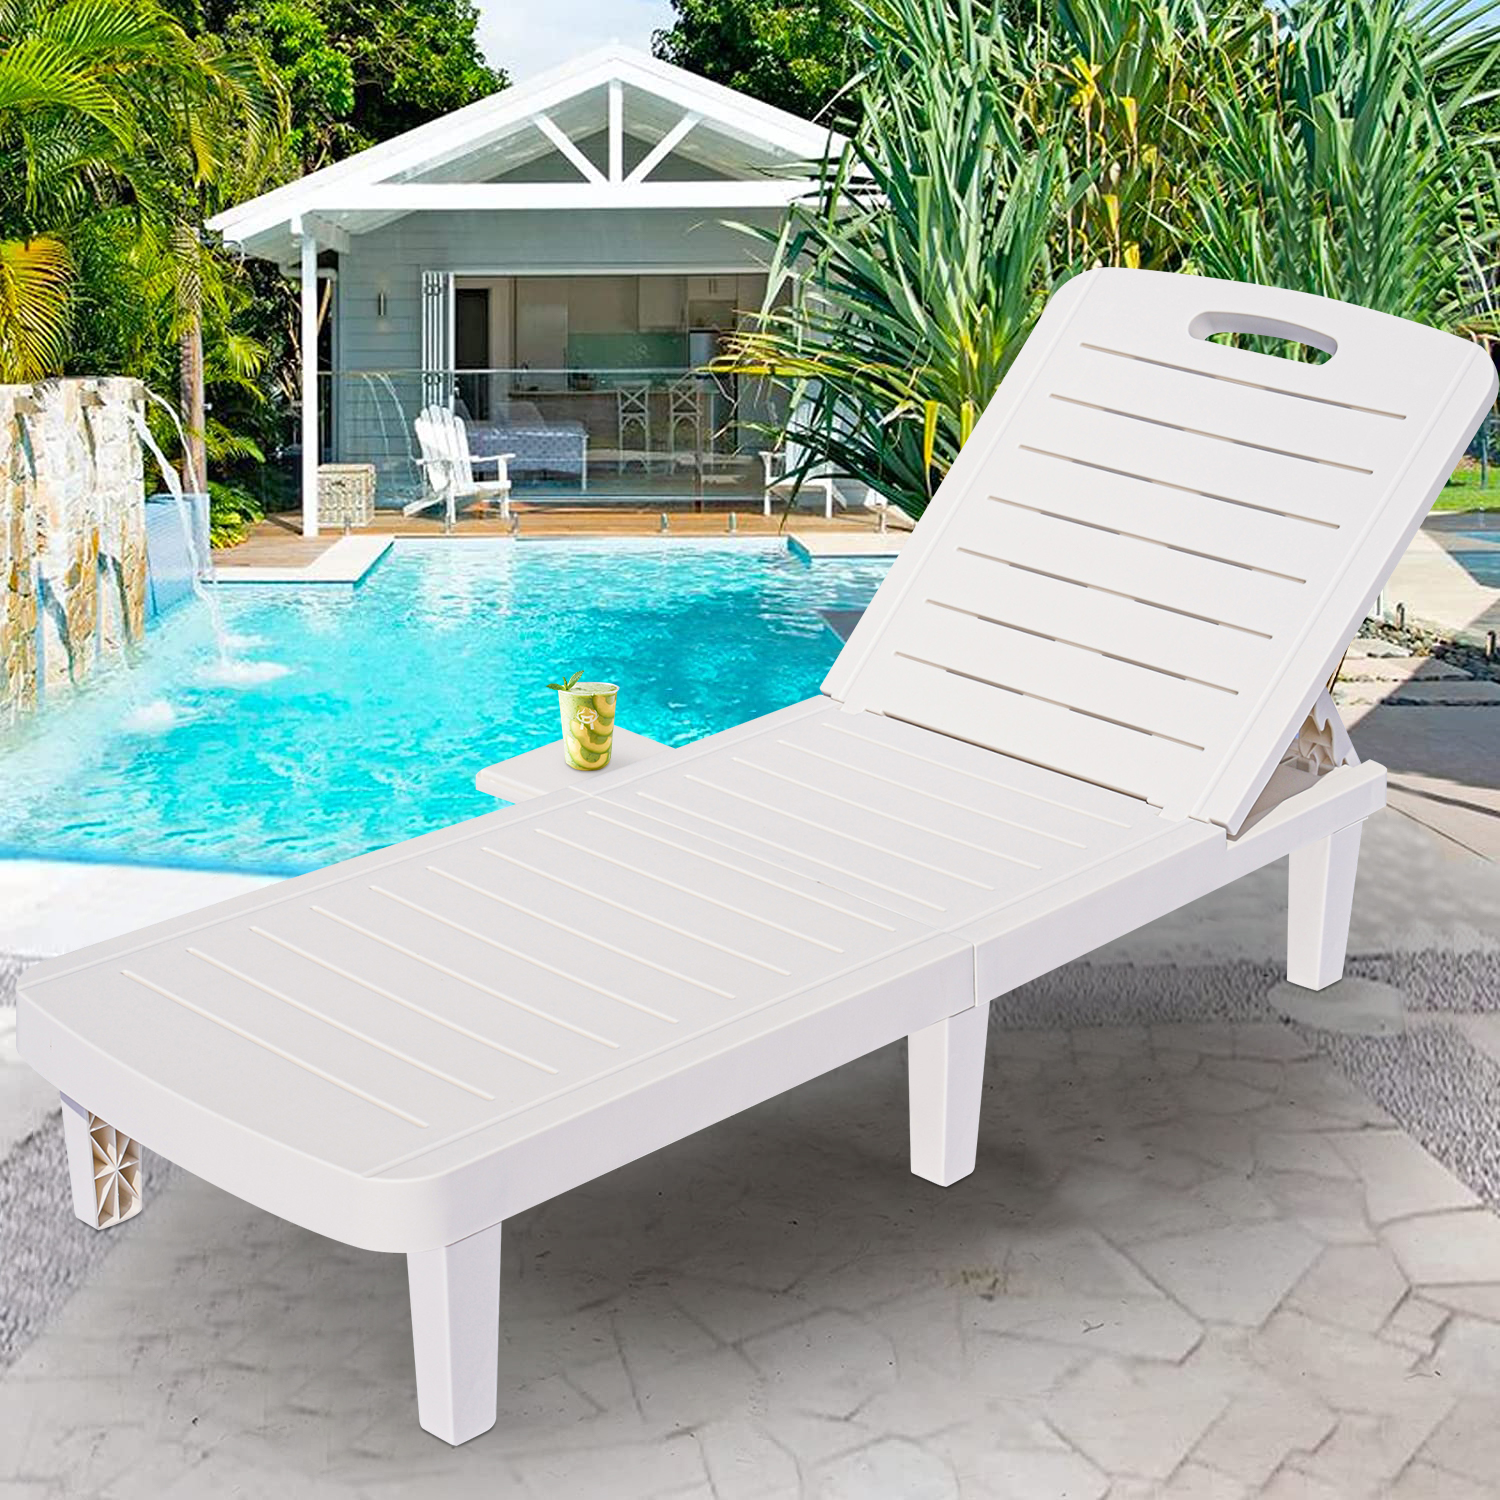 Chaise Lounge for Beach, Single Patio Furniture Set with Retractable Tray, Outdoor Chaise Lounge Chair with Adjustable Back, All-Weather Plastic Reclining Lounge Chair for Backyard, Garden, Pool, L454 - image 1 of 9